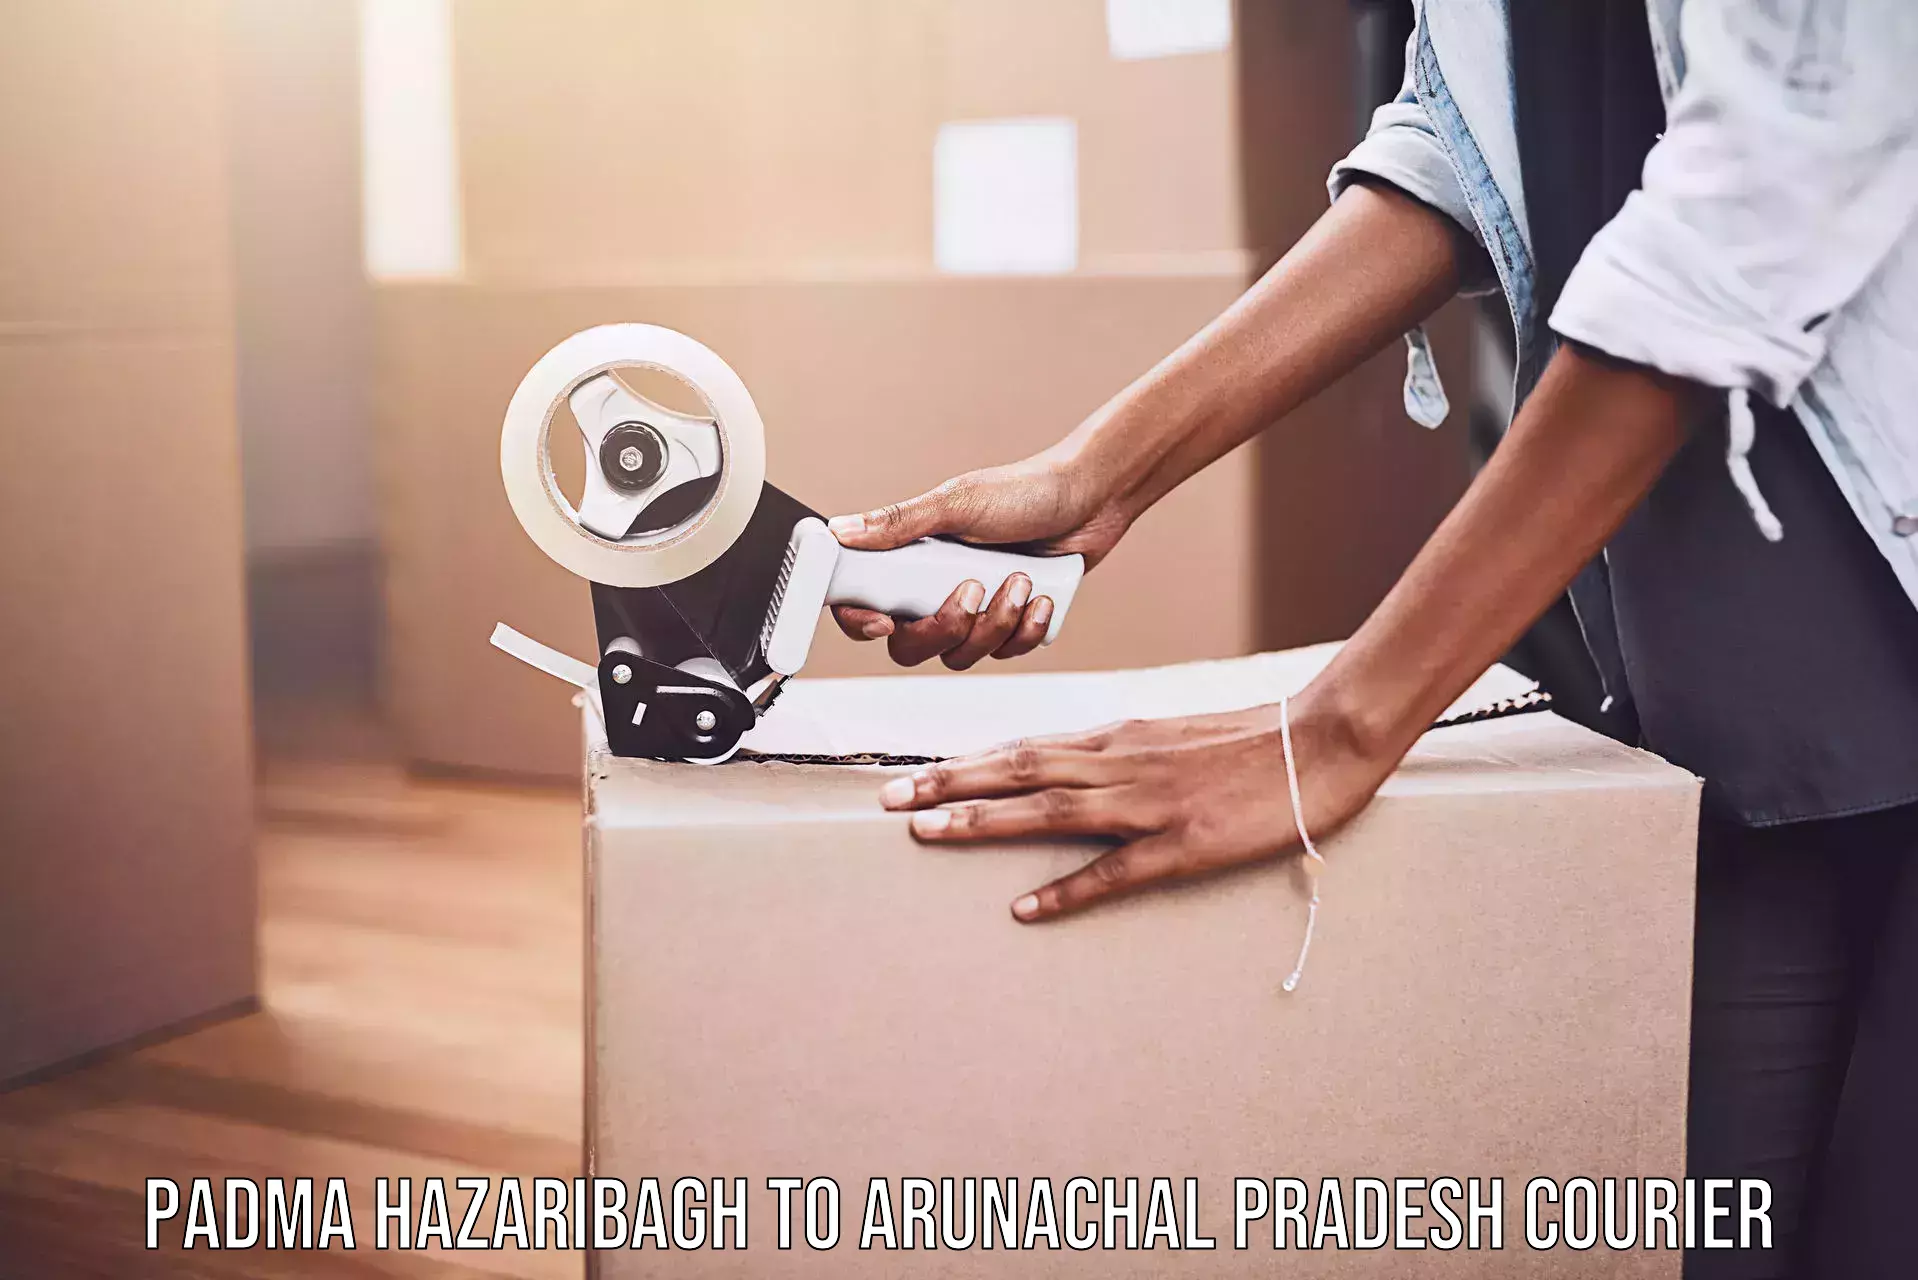 Courier service comparison Padma Hazaribagh to Bhalukpong